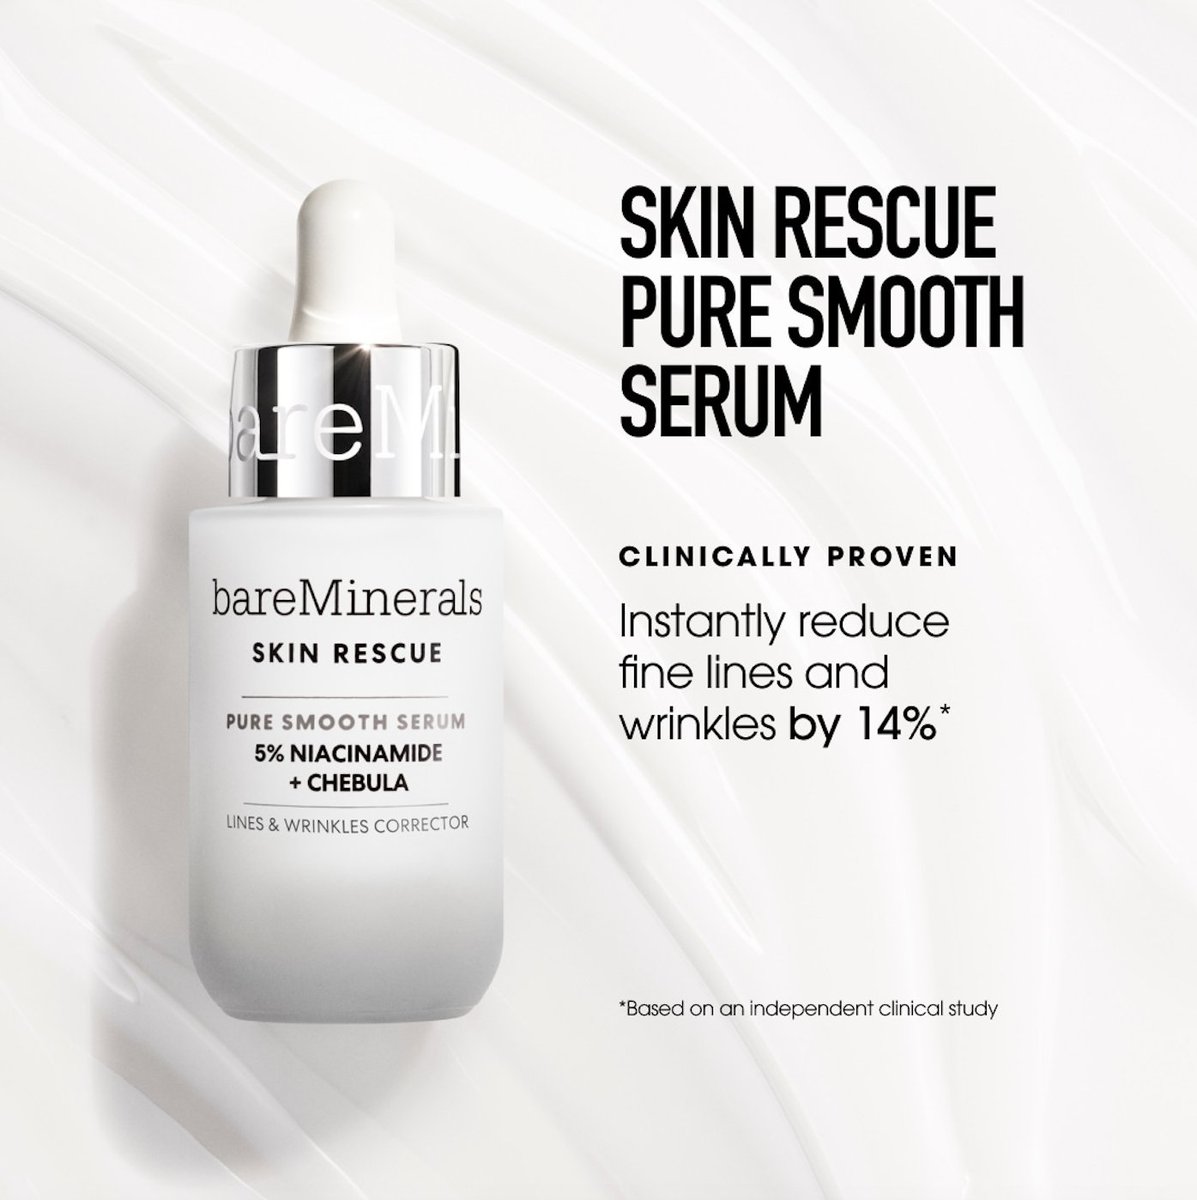 @bareMinerals, the leader in clean beauty, continues to produce new, innovative products to keep up with customer demands. Meet their newest trio of Pure Potent Serums, SKIN RESCUE.